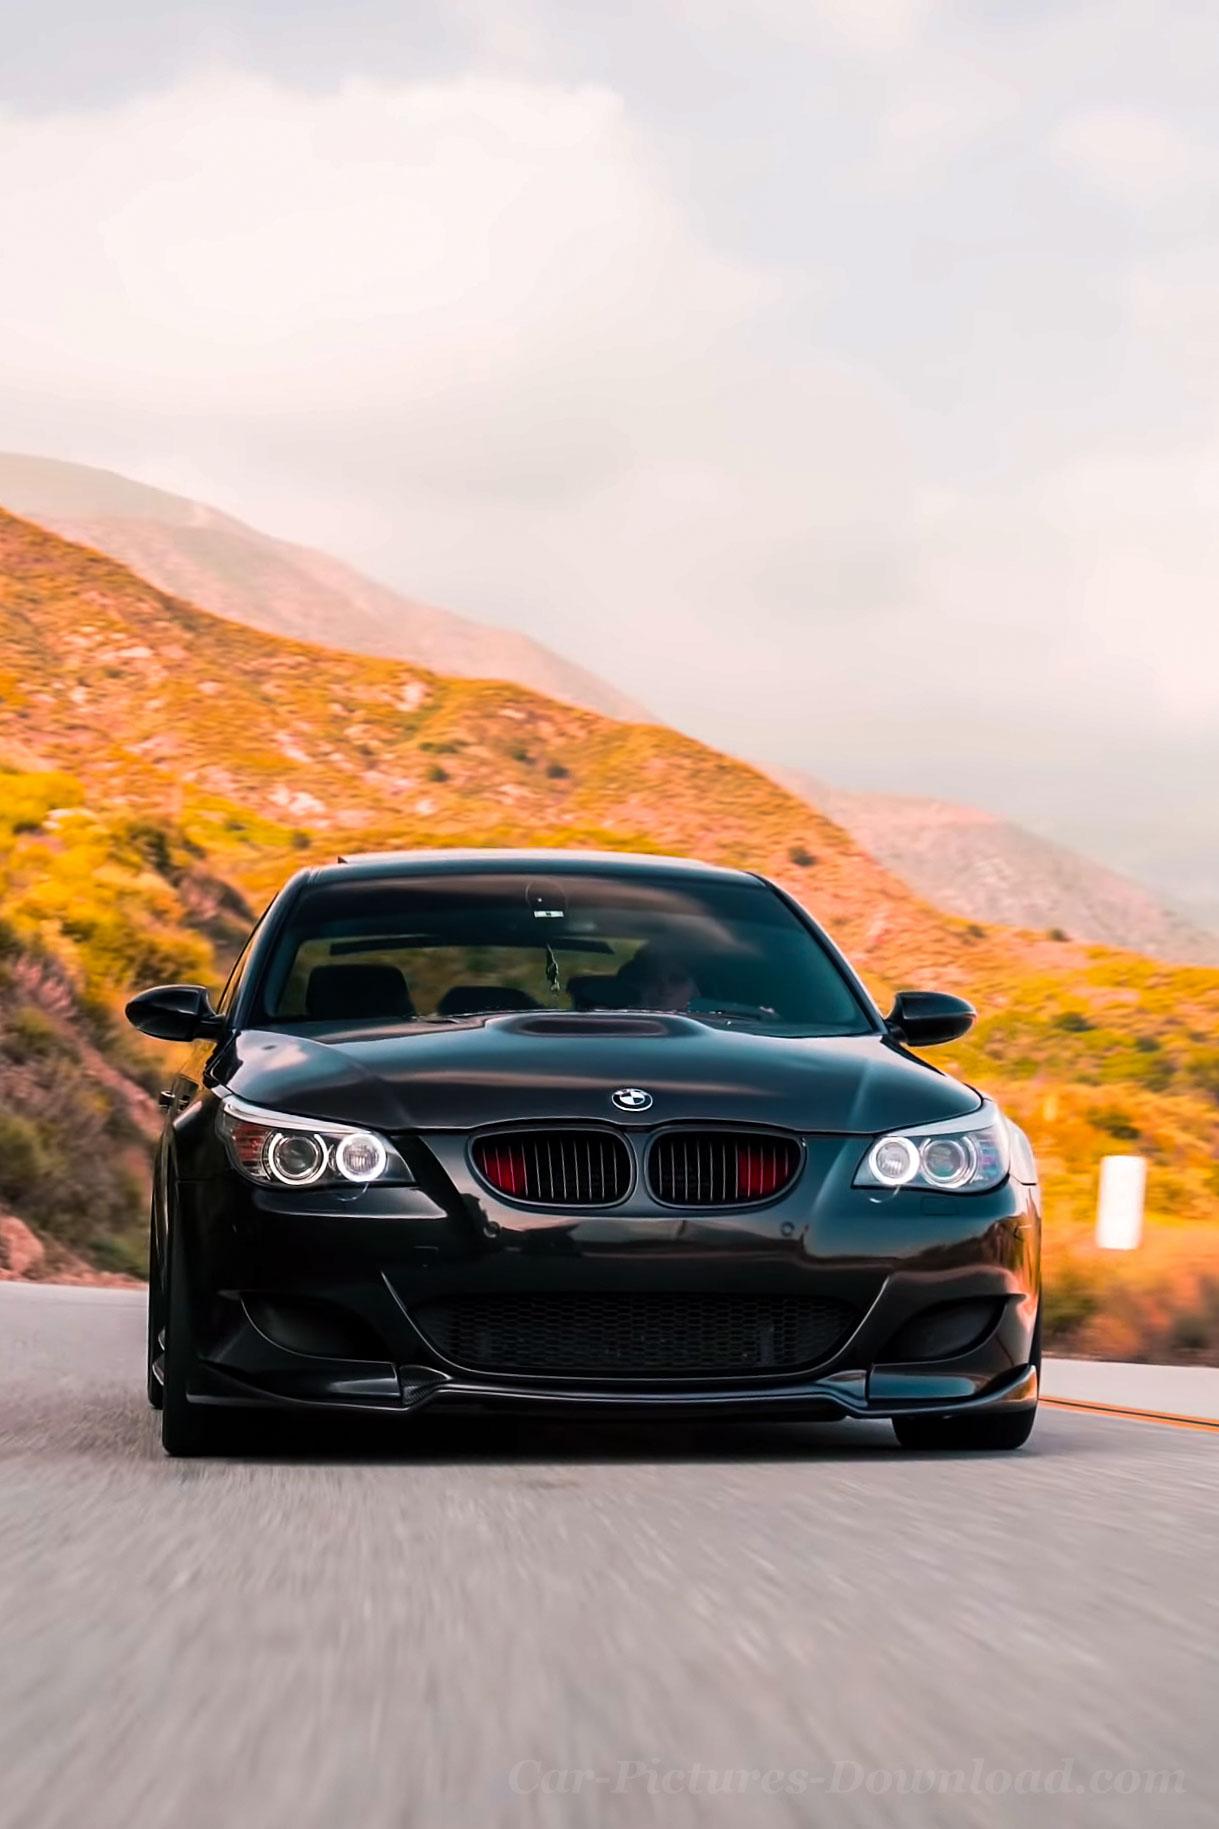 BMW M5 Wallpaper Image & Mobile Device Picture Download